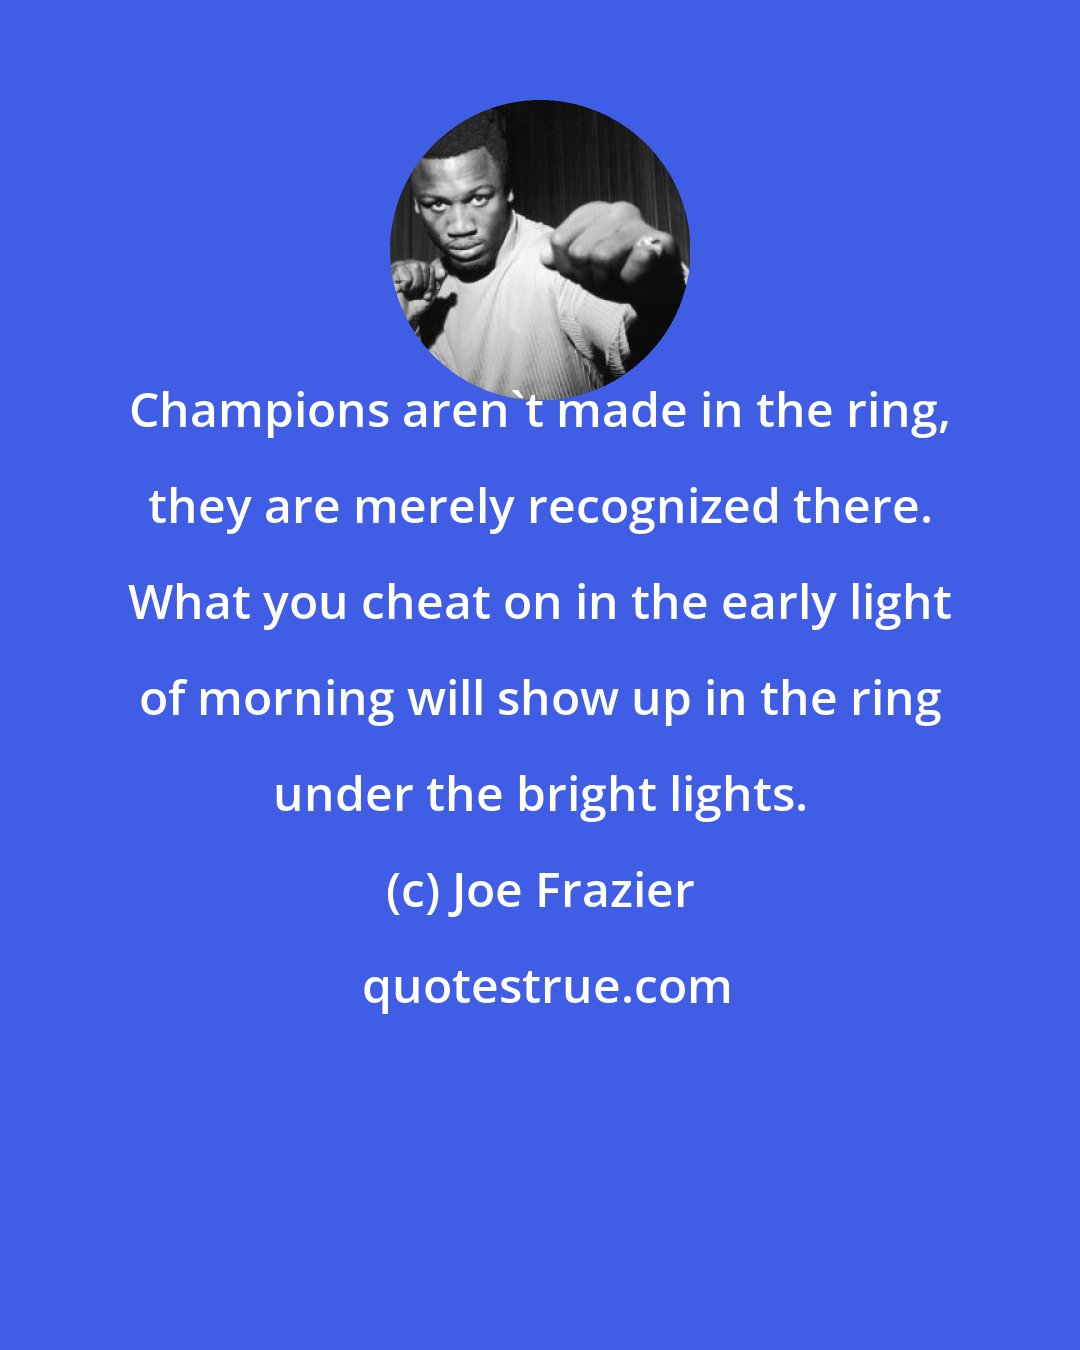 Joe Frazier: Champions aren't made in the ring, they are merely recognized there. What you cheat on in the early light of morning will show up in the ring under the bright lights.